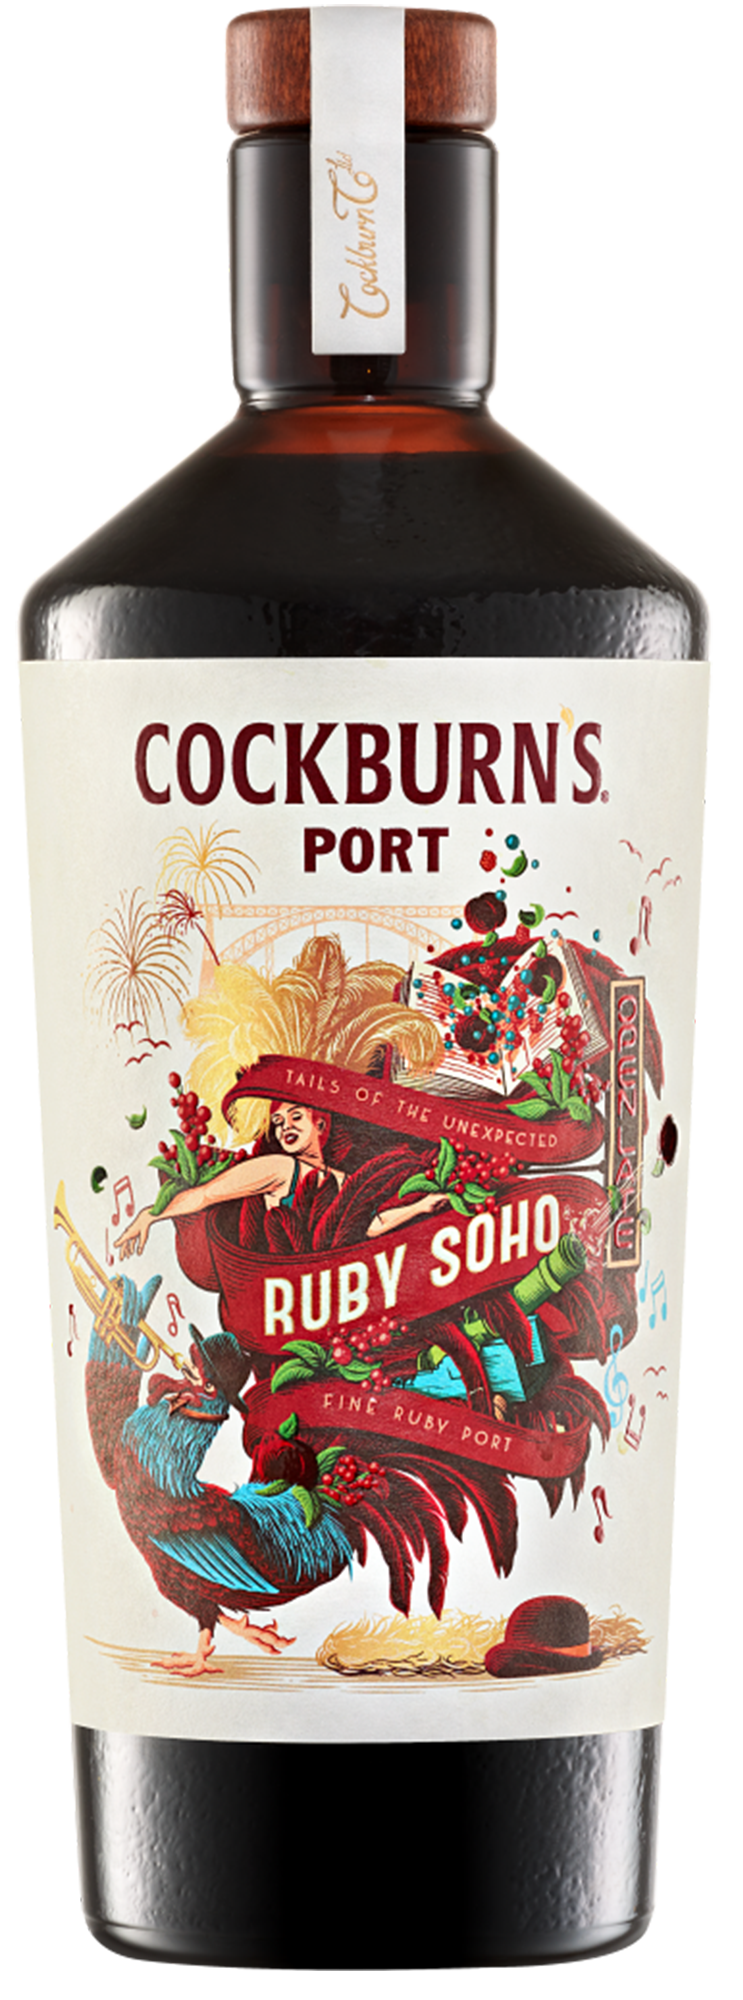 Product Image for COCKBURN'S 'TAILS OF THE UNEXPECTED' RUBY SOHO